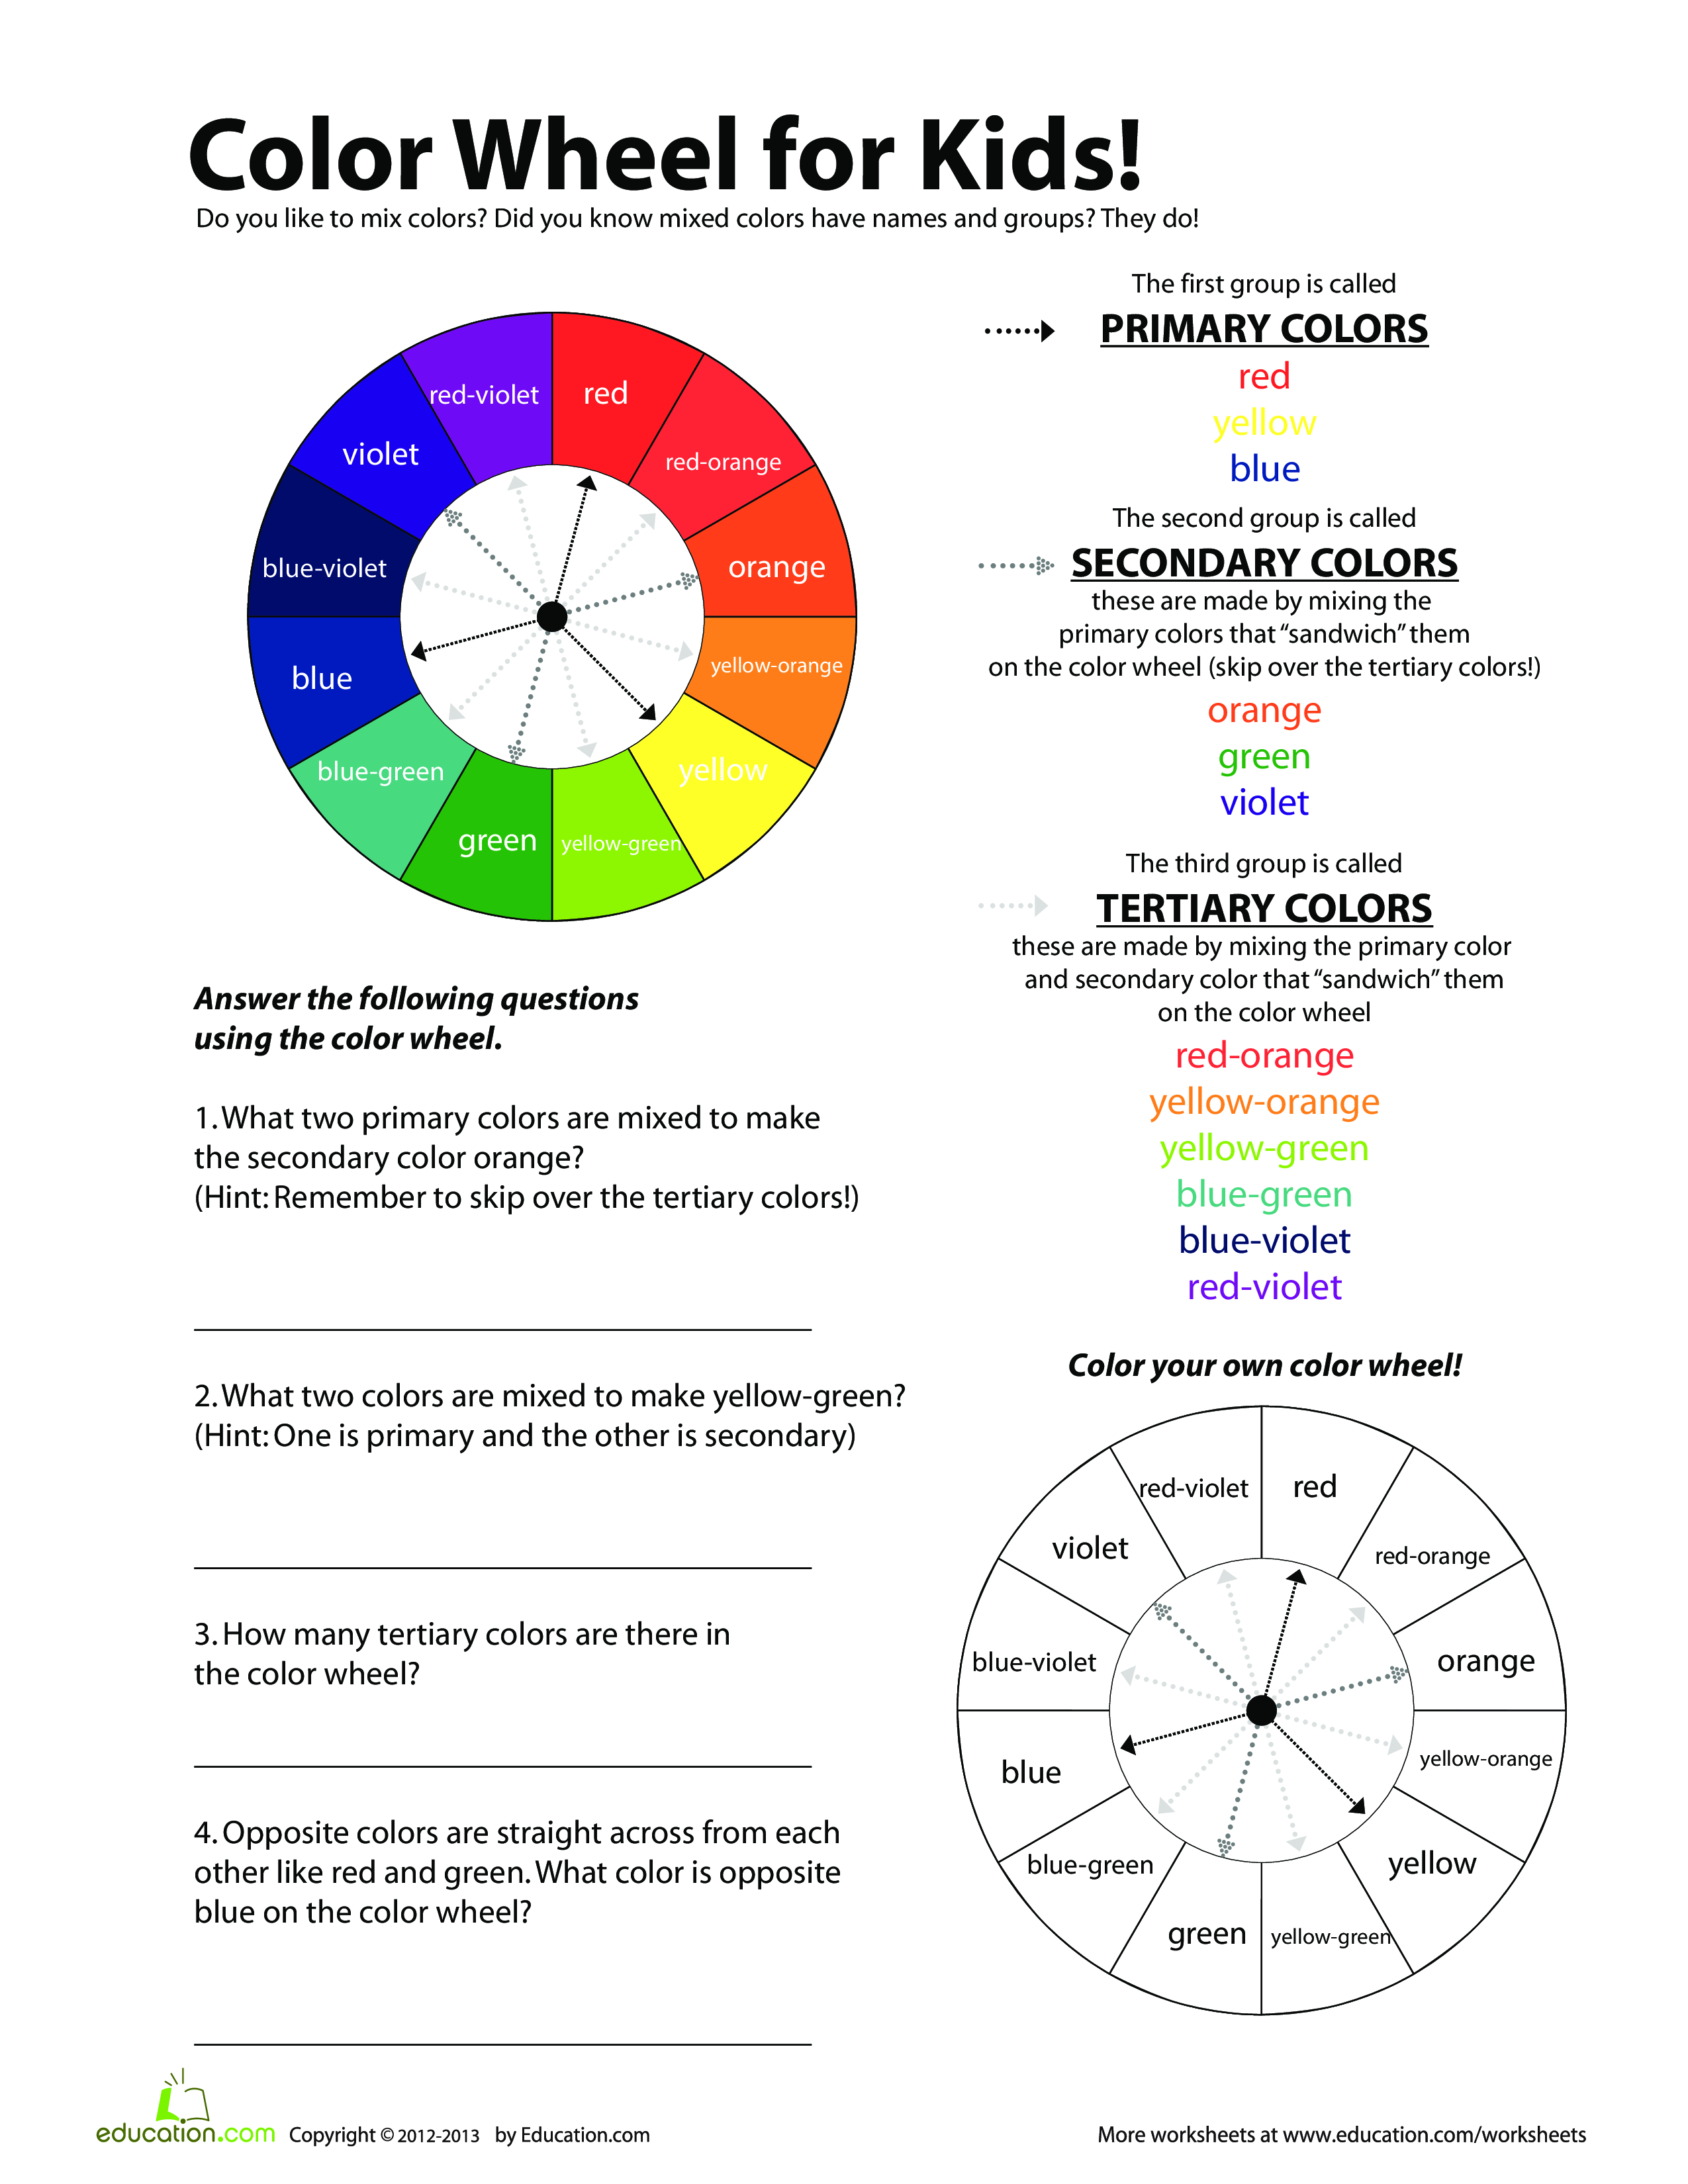 color wheel chart for kids template